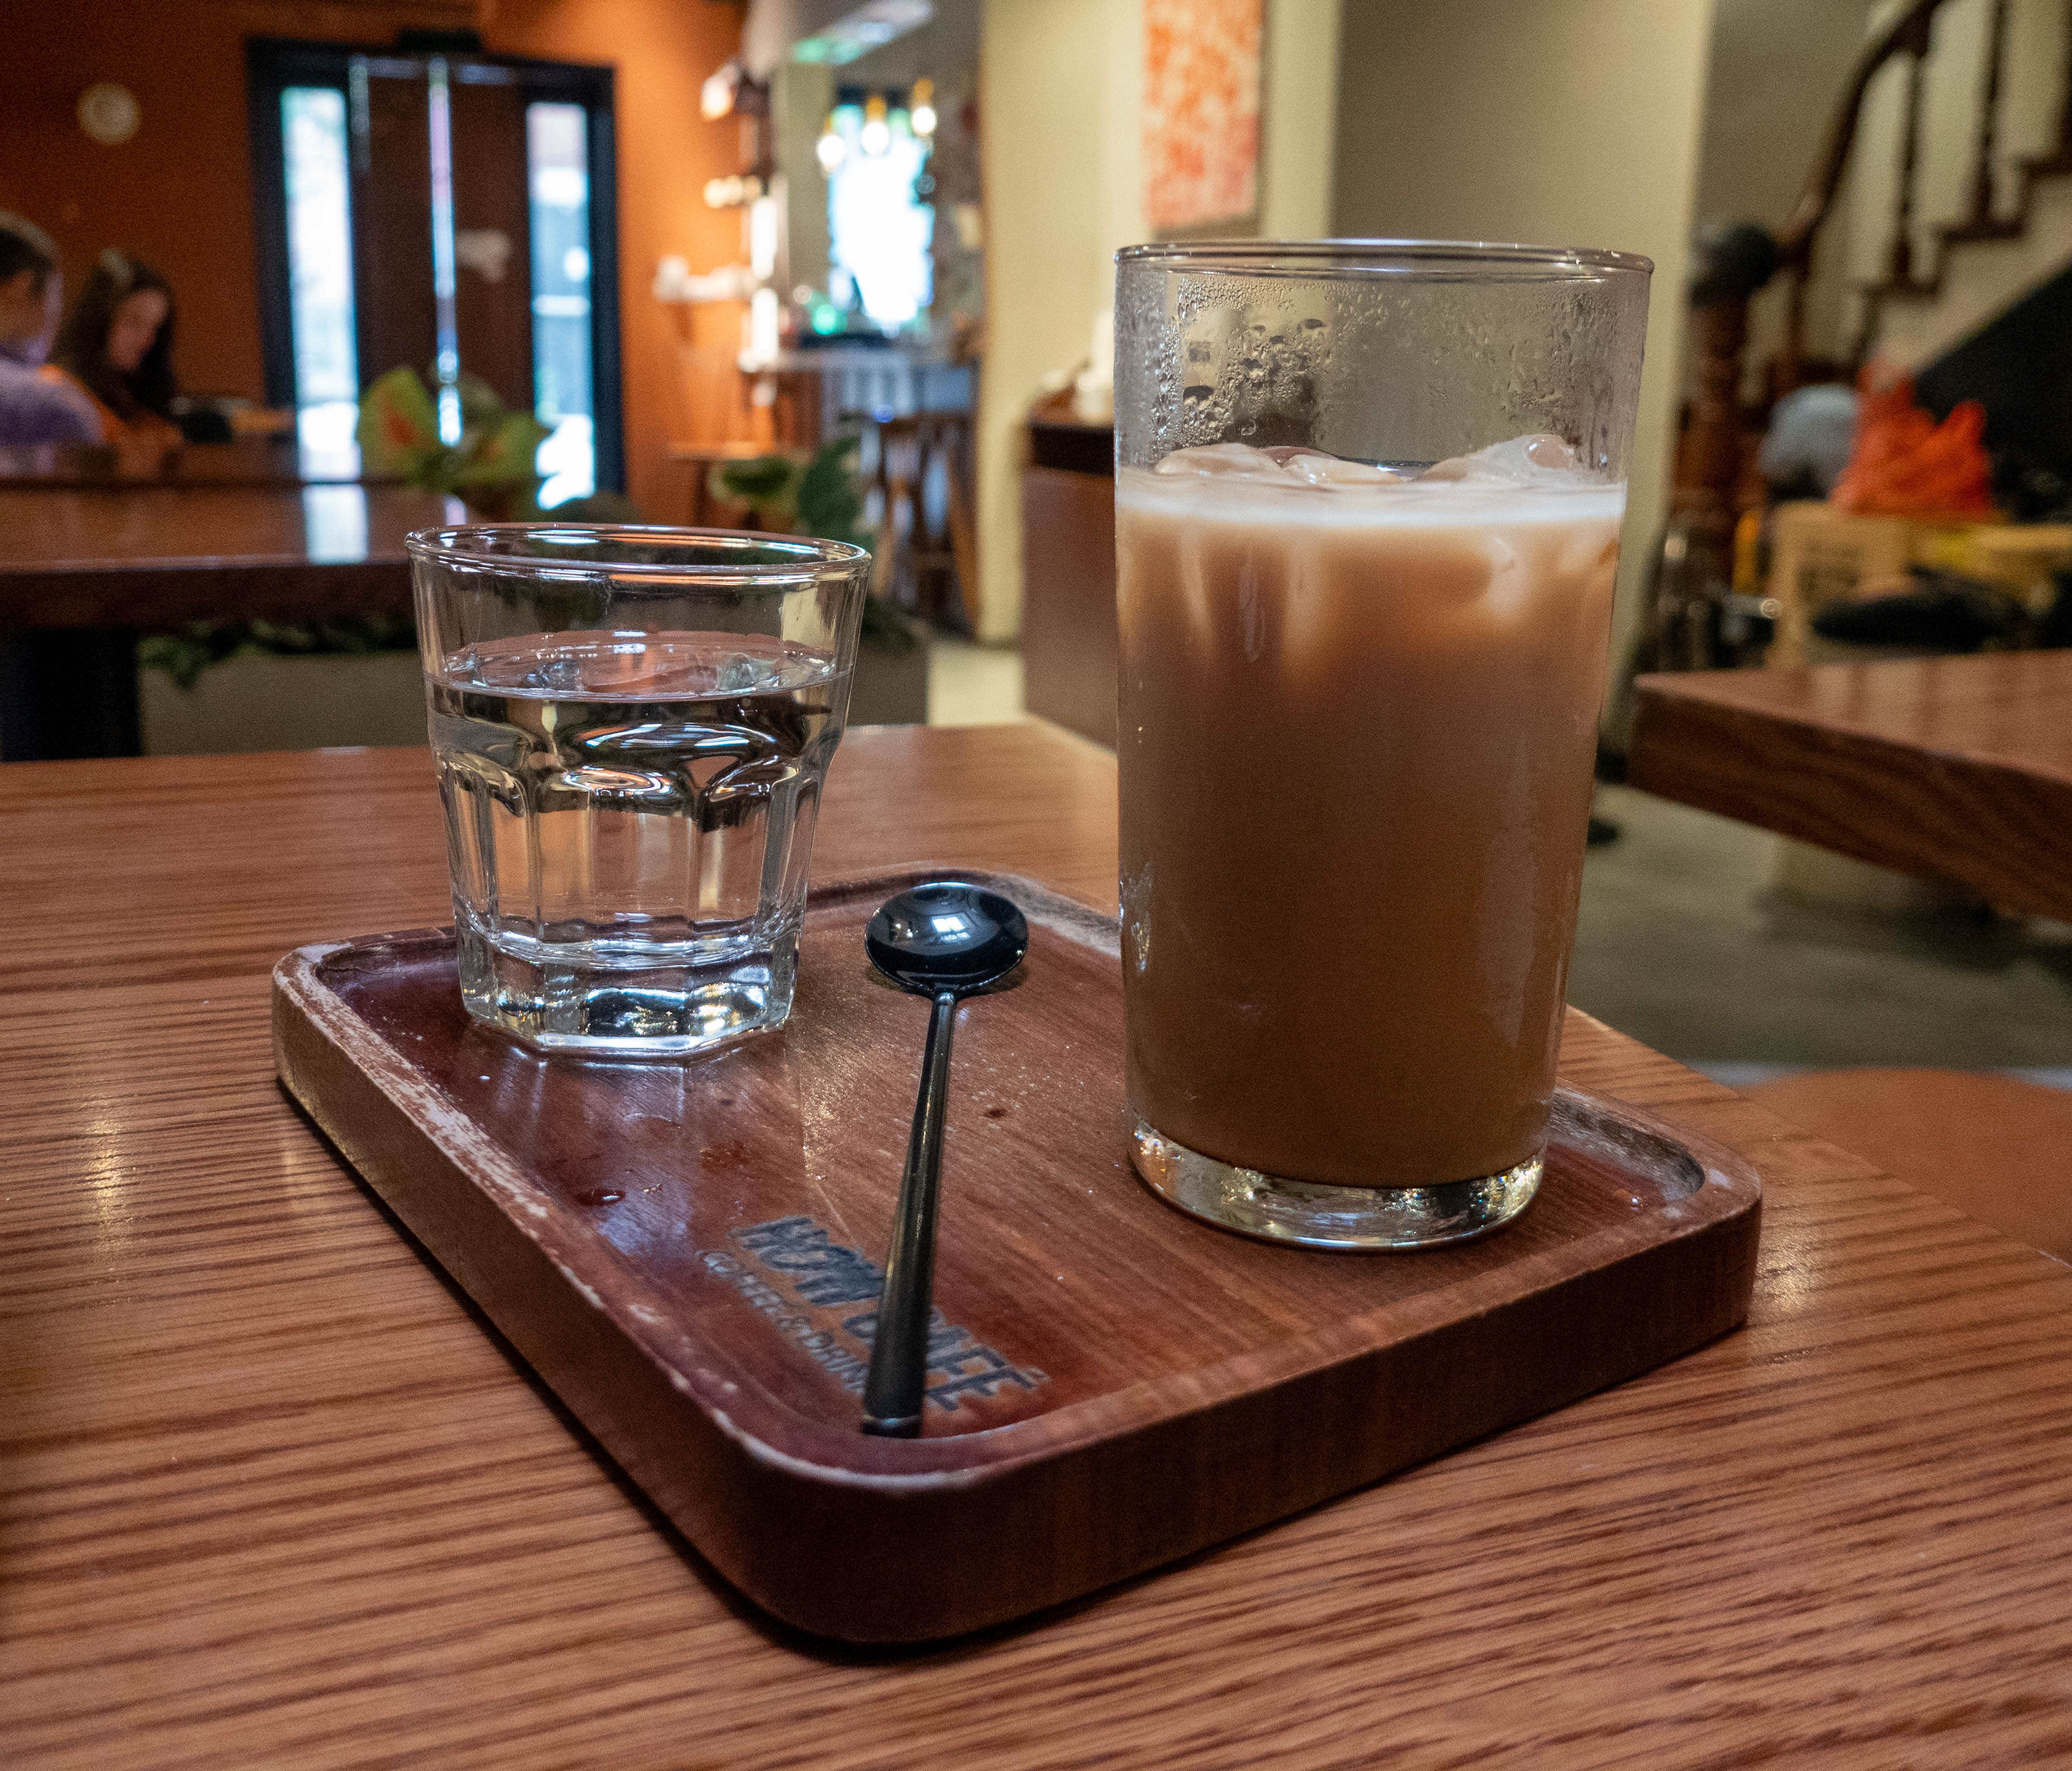 small glass of water on left and tall glass on right with coffee and milk on ice